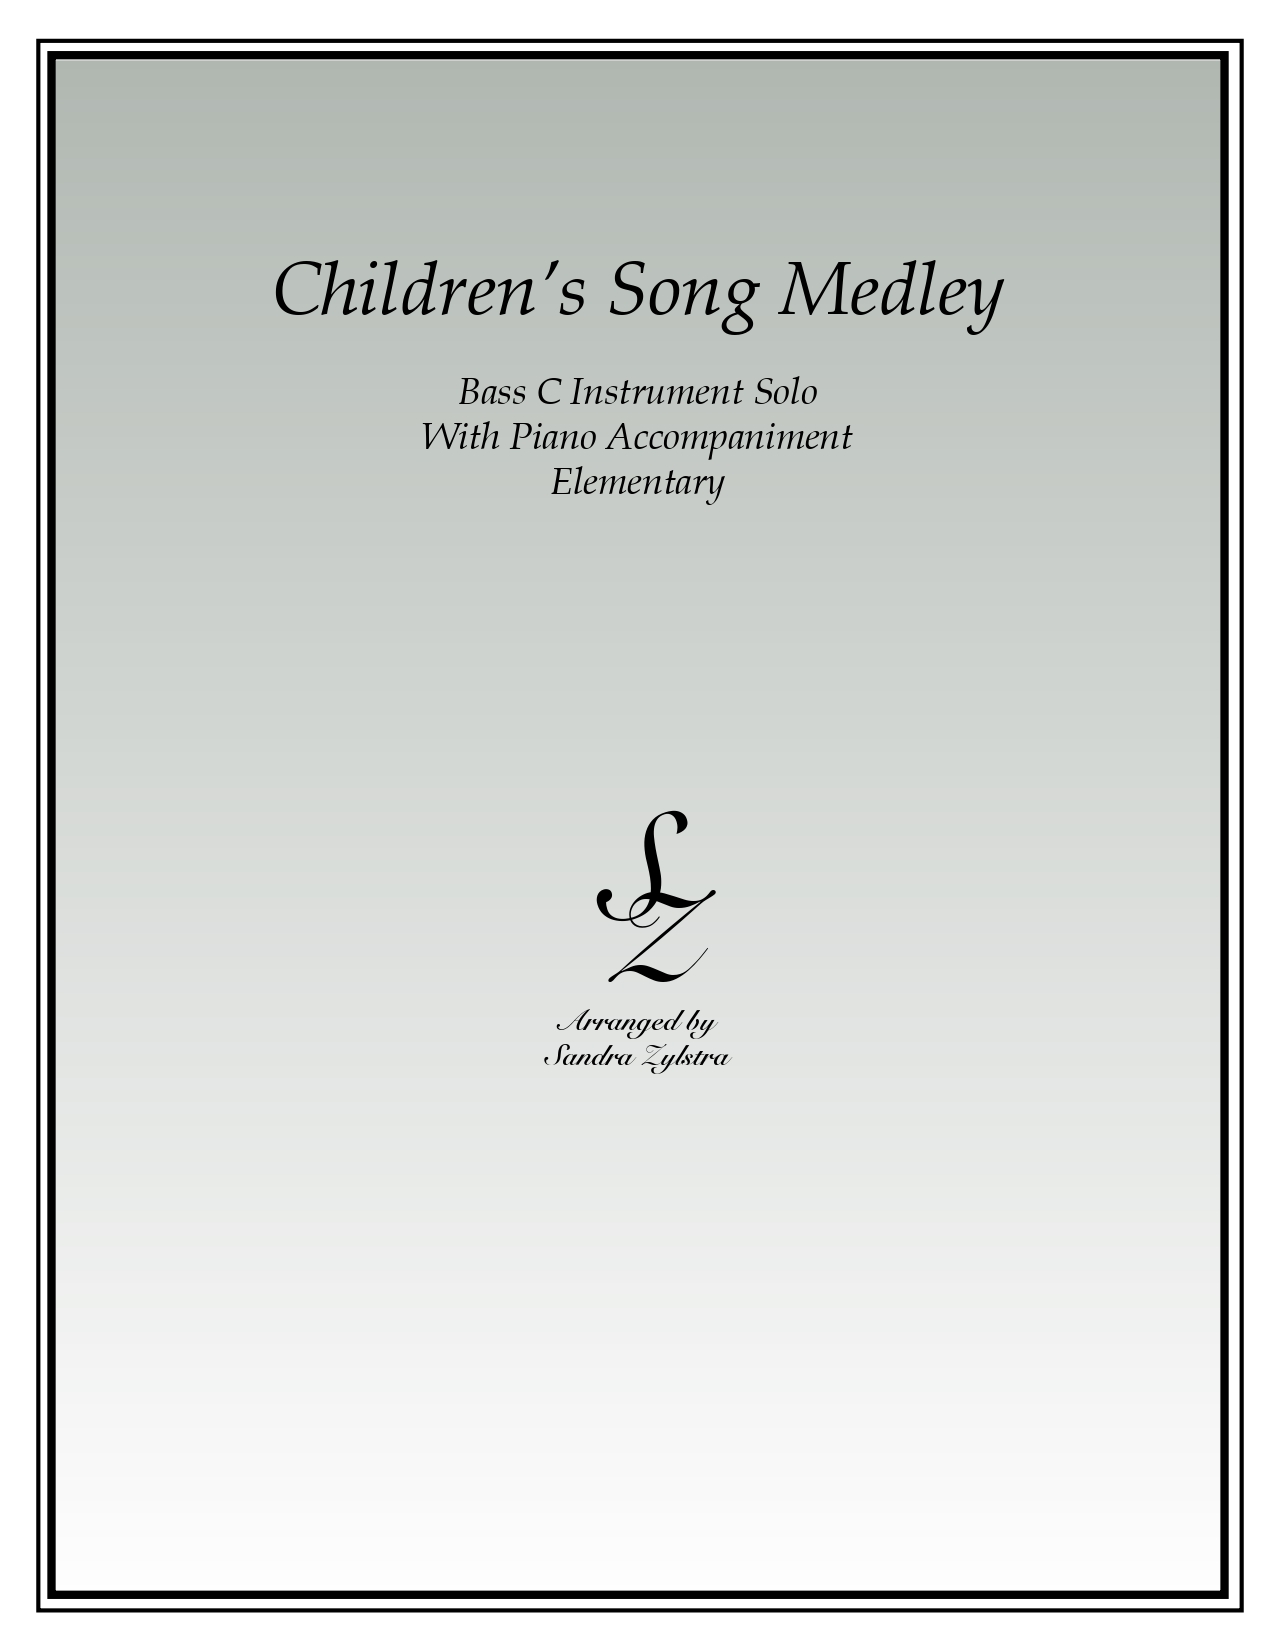 Childrens Song Medley bass C instrument solo part cover page 00011